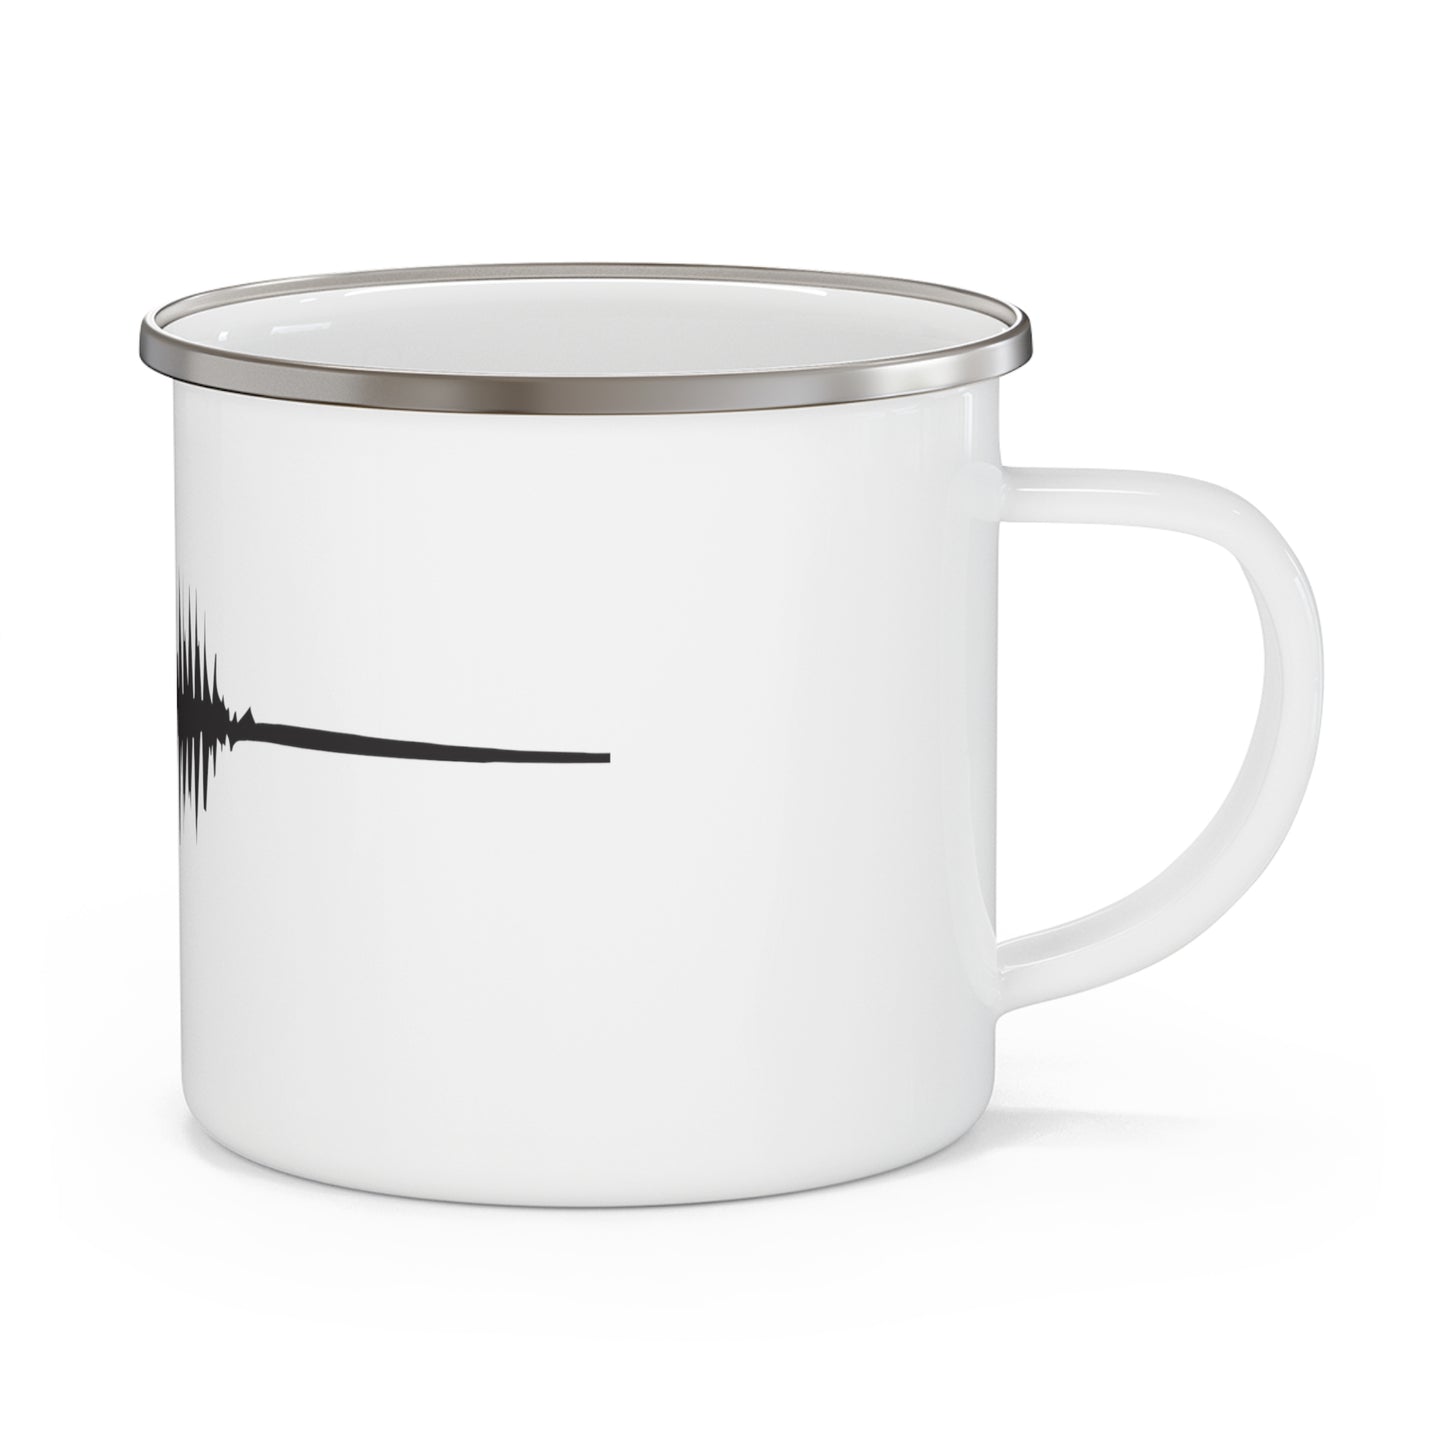 Enamel Camping Mug with 'I Love You' Wave Form Design - Rustic Outdoor Drinkware